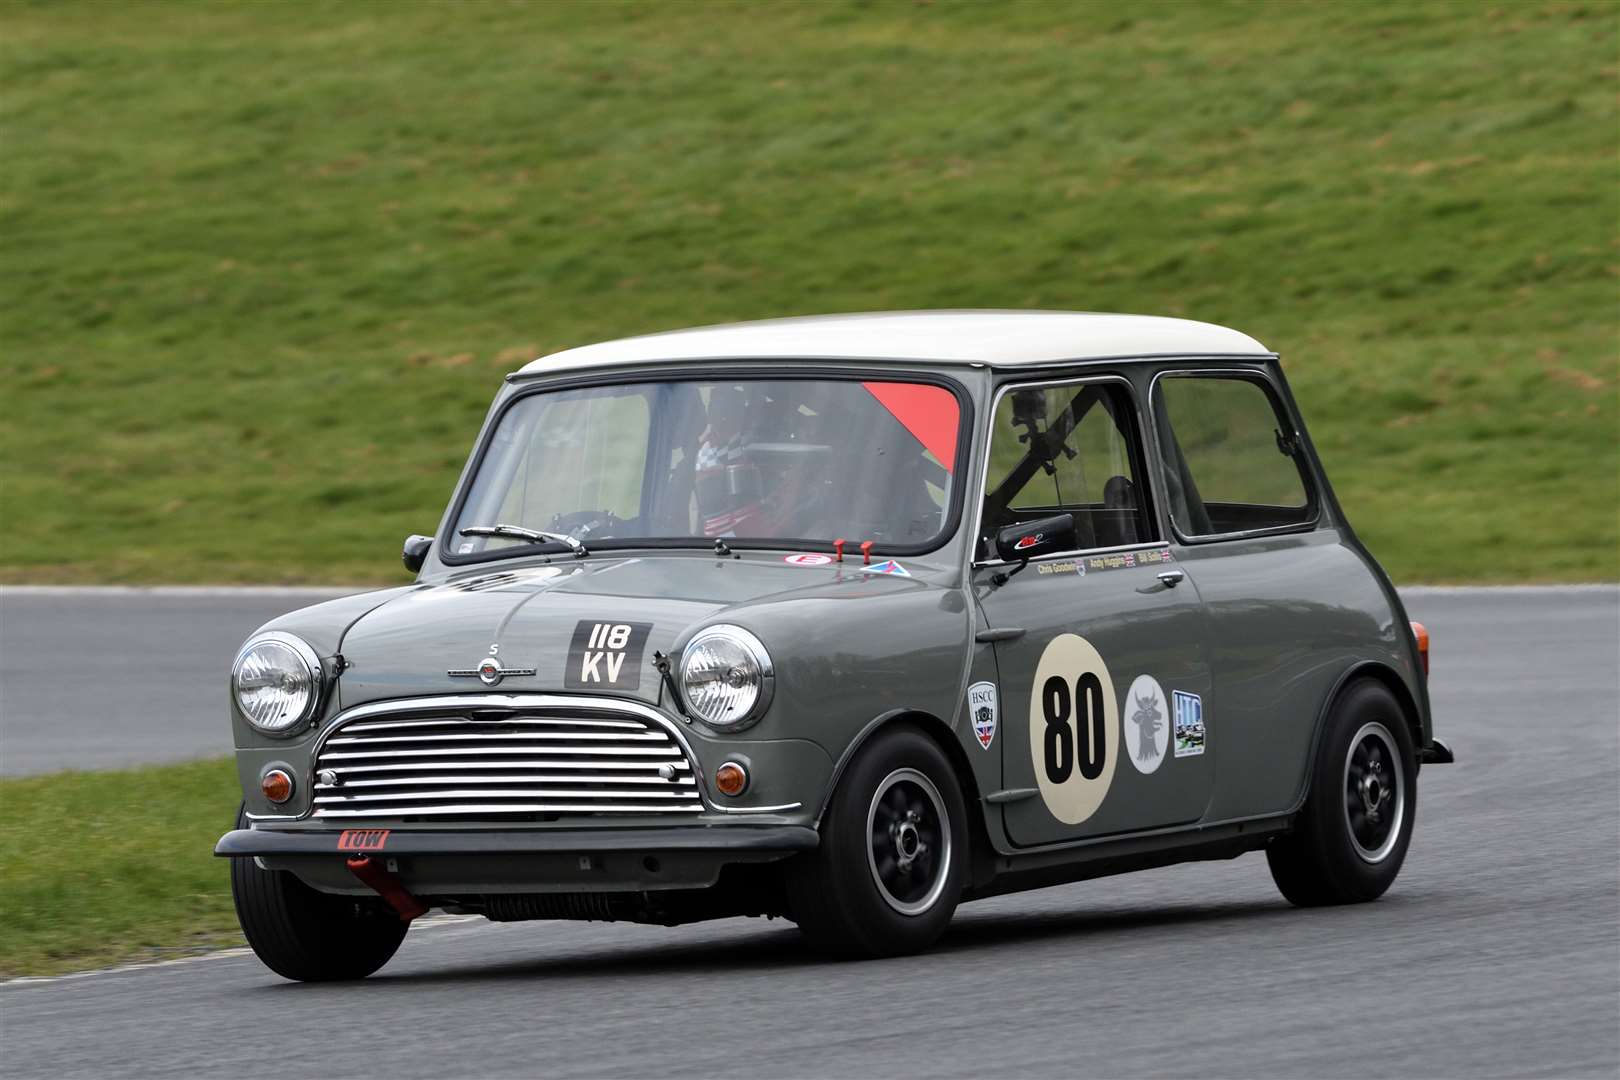 Bill Sollis scored a win, a third place and two fastest laps in the two Historic Touring Car races in his 1963 Mini Cooper S. Pictures: Simon Hildrew